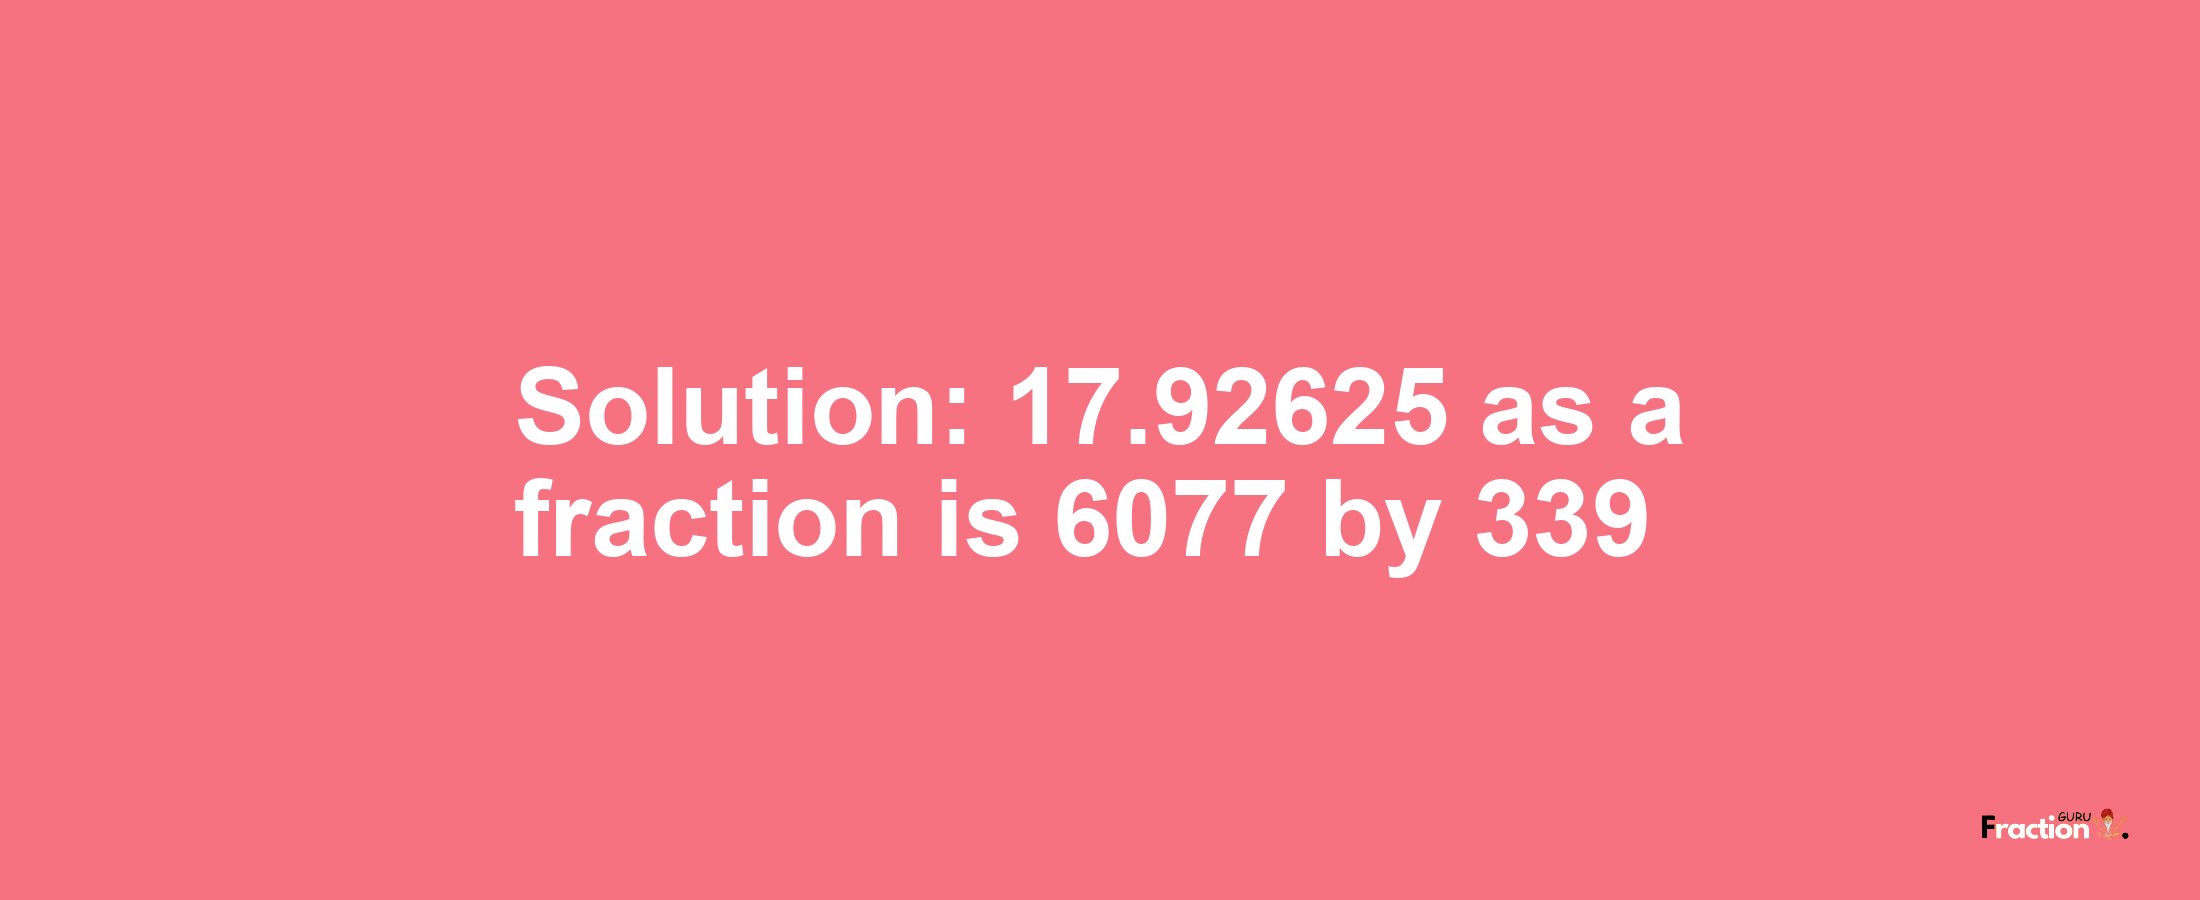 Solution:17.92625 as a fraction is 6077/339